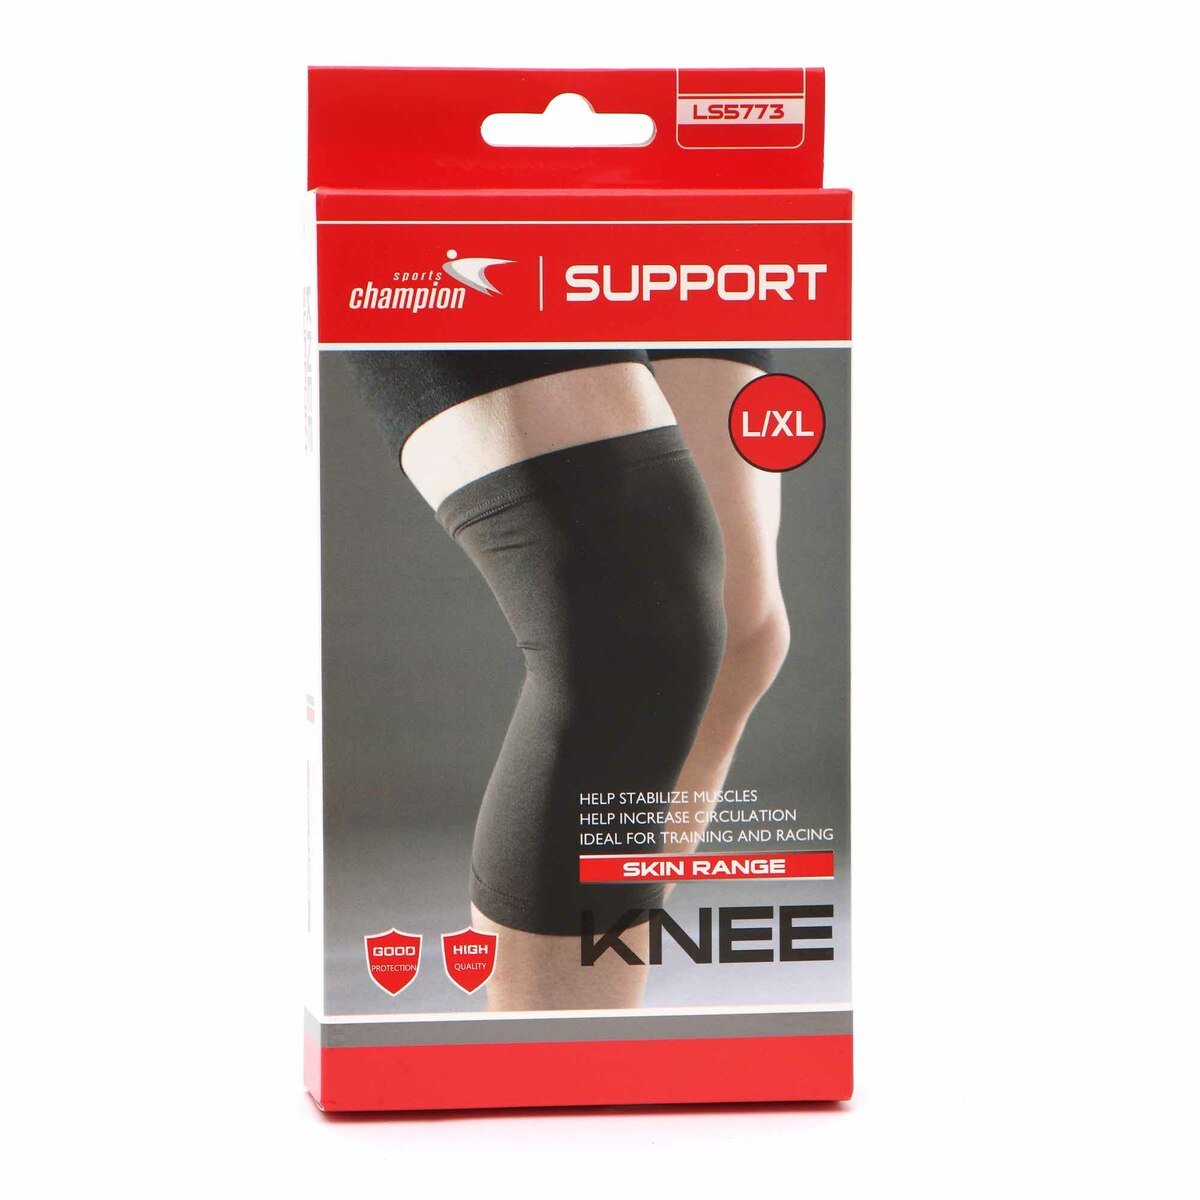 Buy Sports Champion Knee Support LS5773 Large Online at Best Price | Support Products | Lulu Kuwait in Kuwait